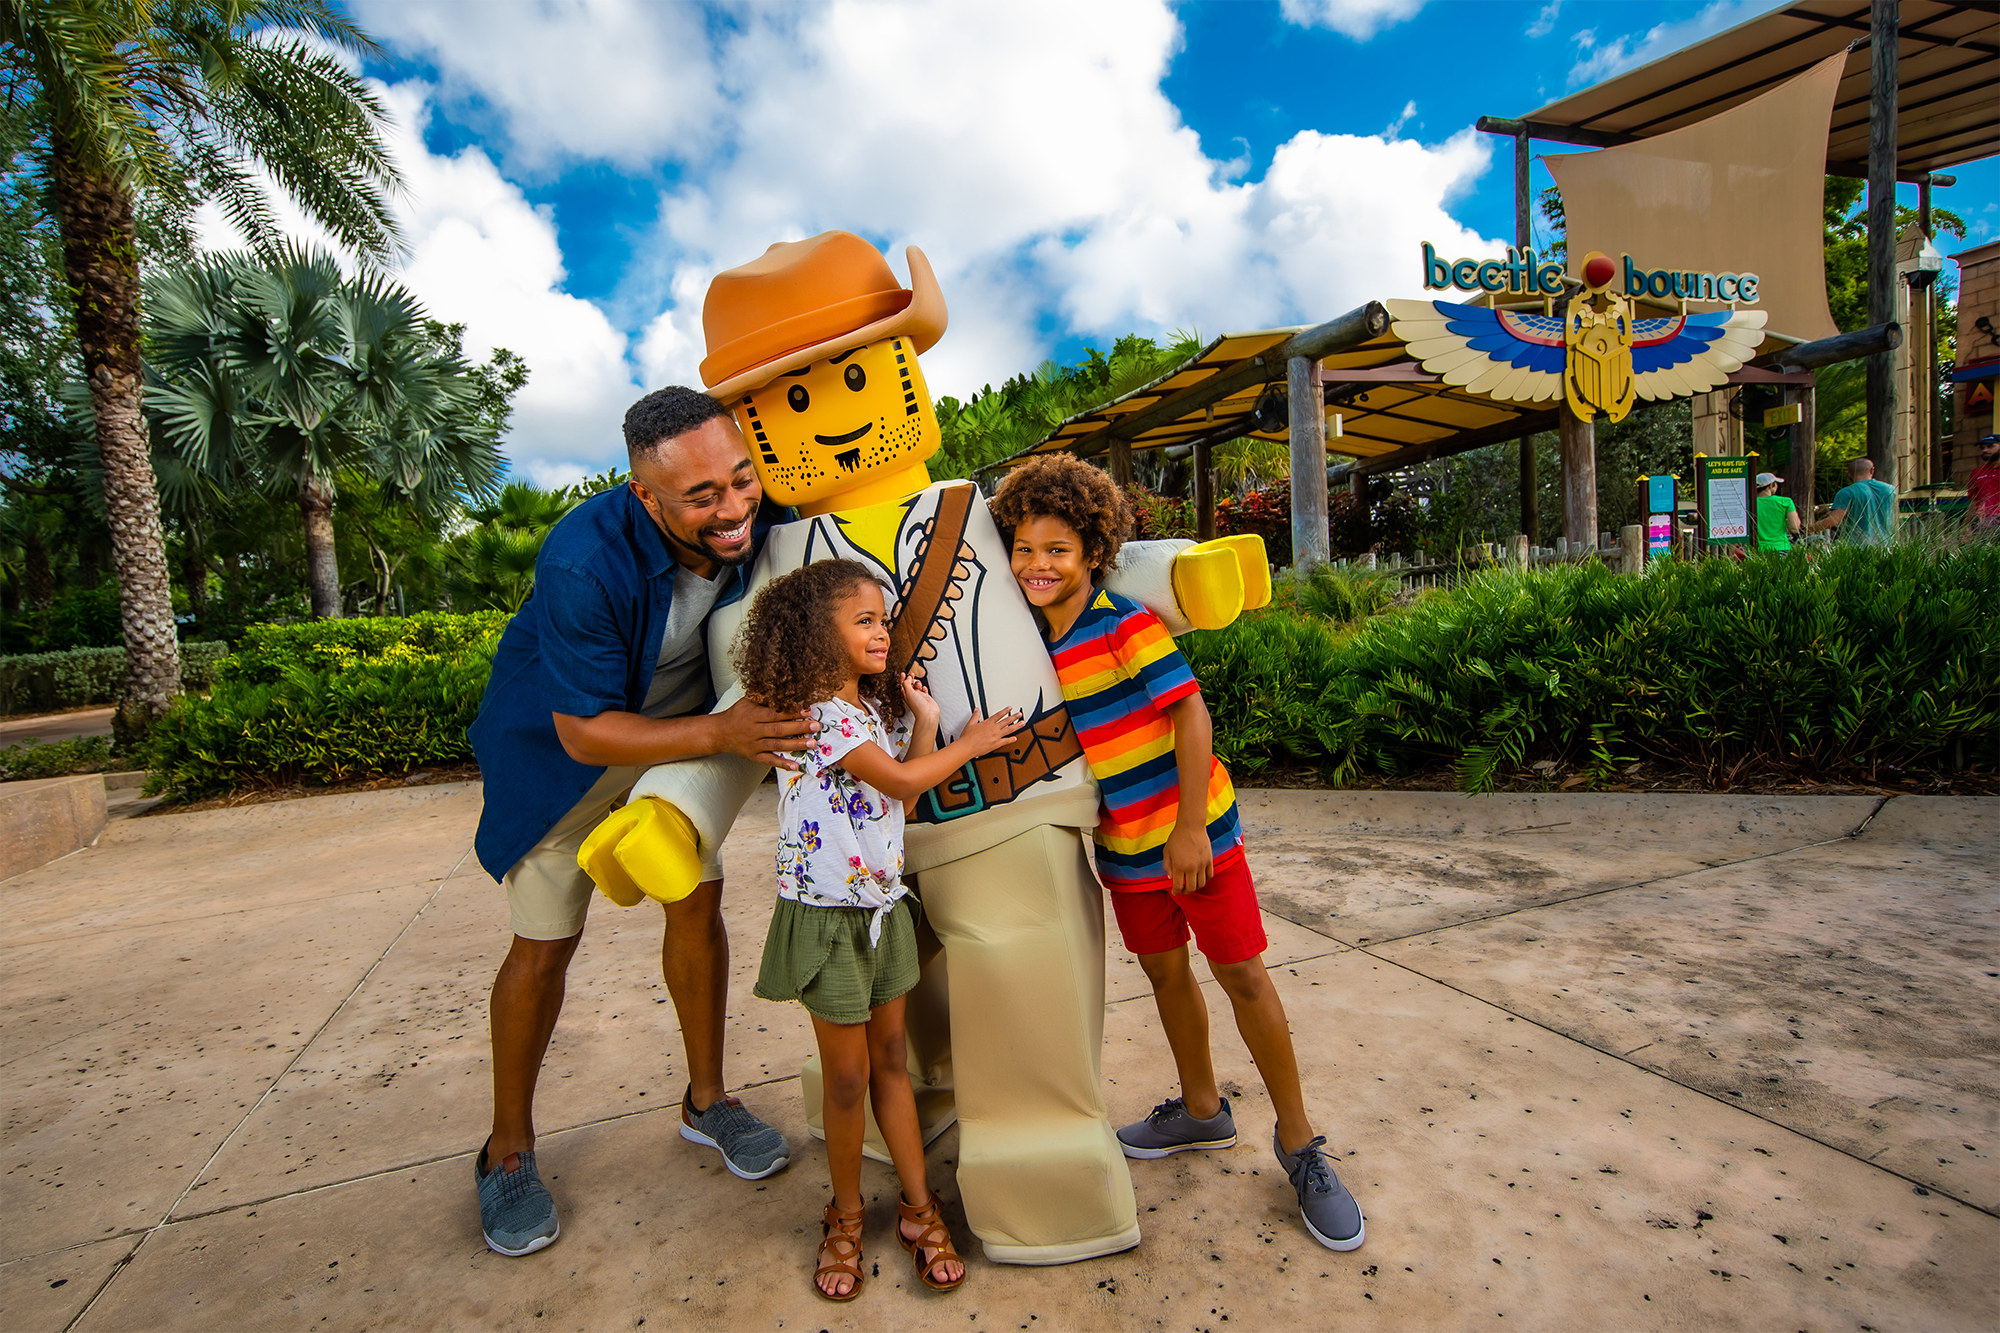 Local's Guide: 30 Day Trips for Unforgettable Experiences From San Diego - The Thrills of Legoland California Resort